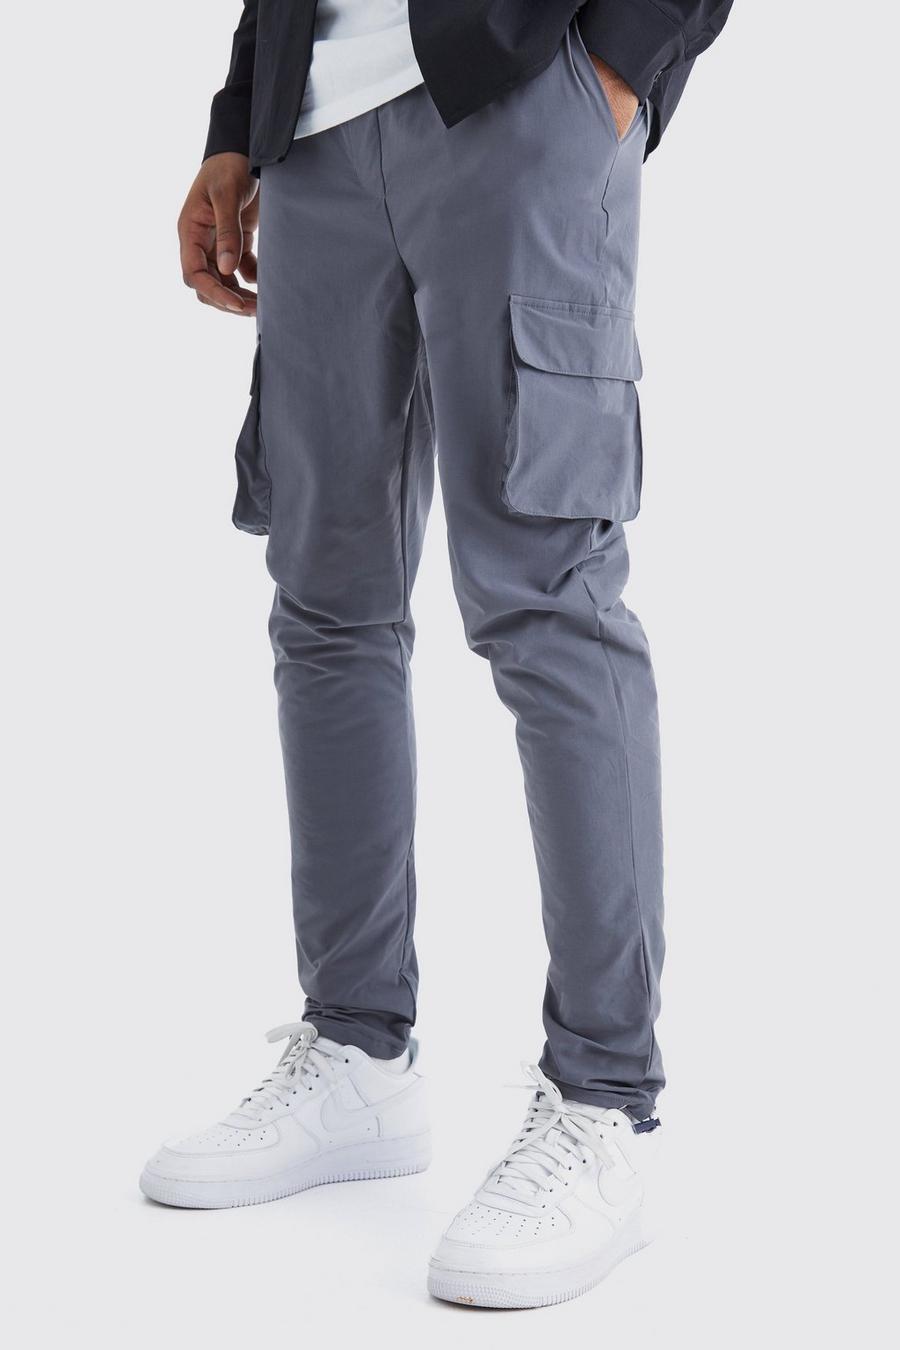 Charcoal grey Tall Elasticated Skinny Technical Stretch Cargo Trouser